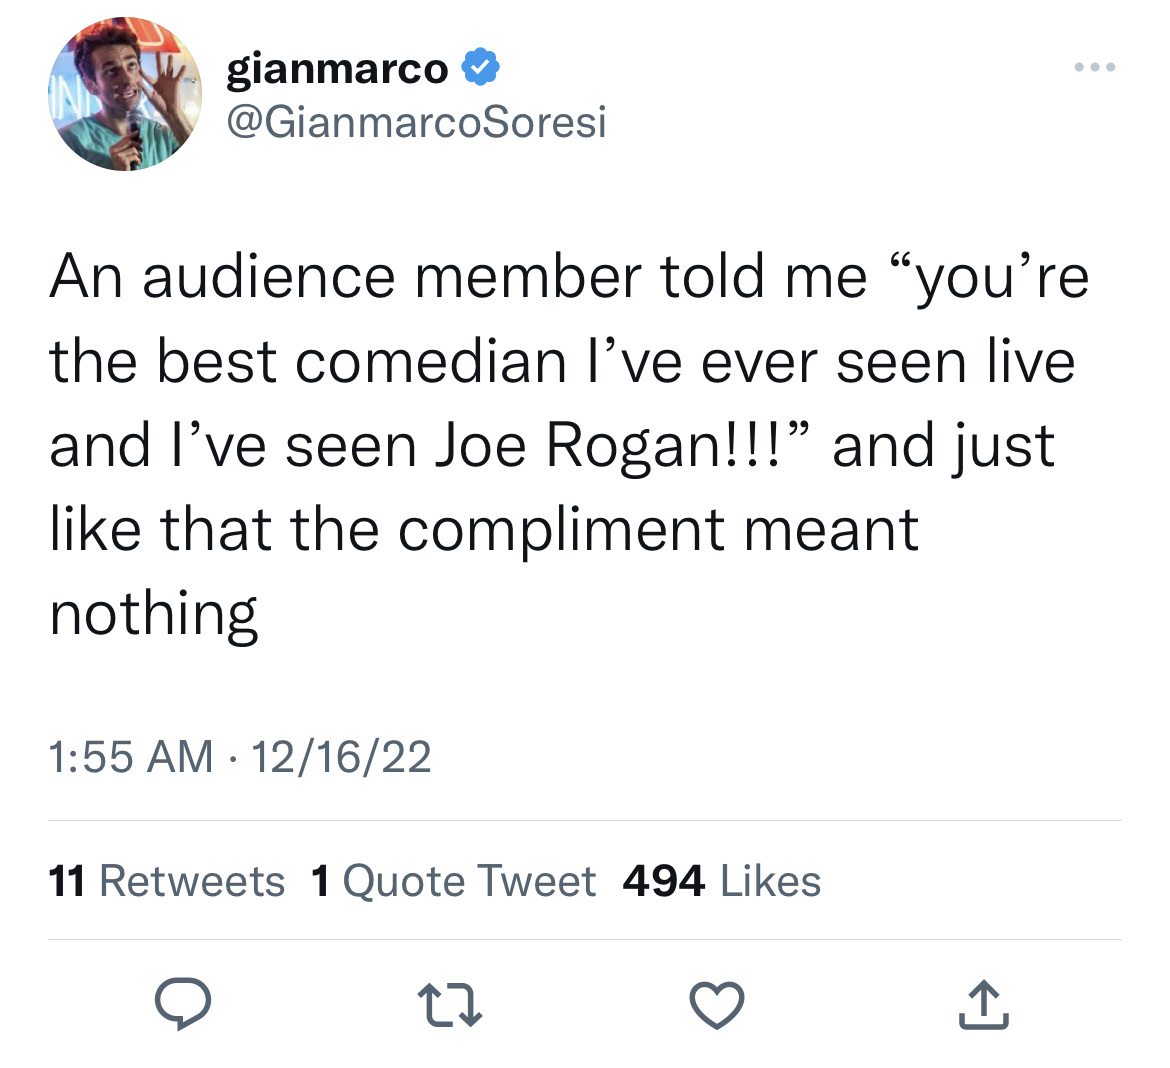 tweets dunking on celebs - go robert mueller an the rule of law - gianmarco An audience member told me "you're the best comedian I've ever seen live and I've seen Joe Rogan!!!" and just that the compliment meant nothing 121622 11 1 Quote Tweet 494 27